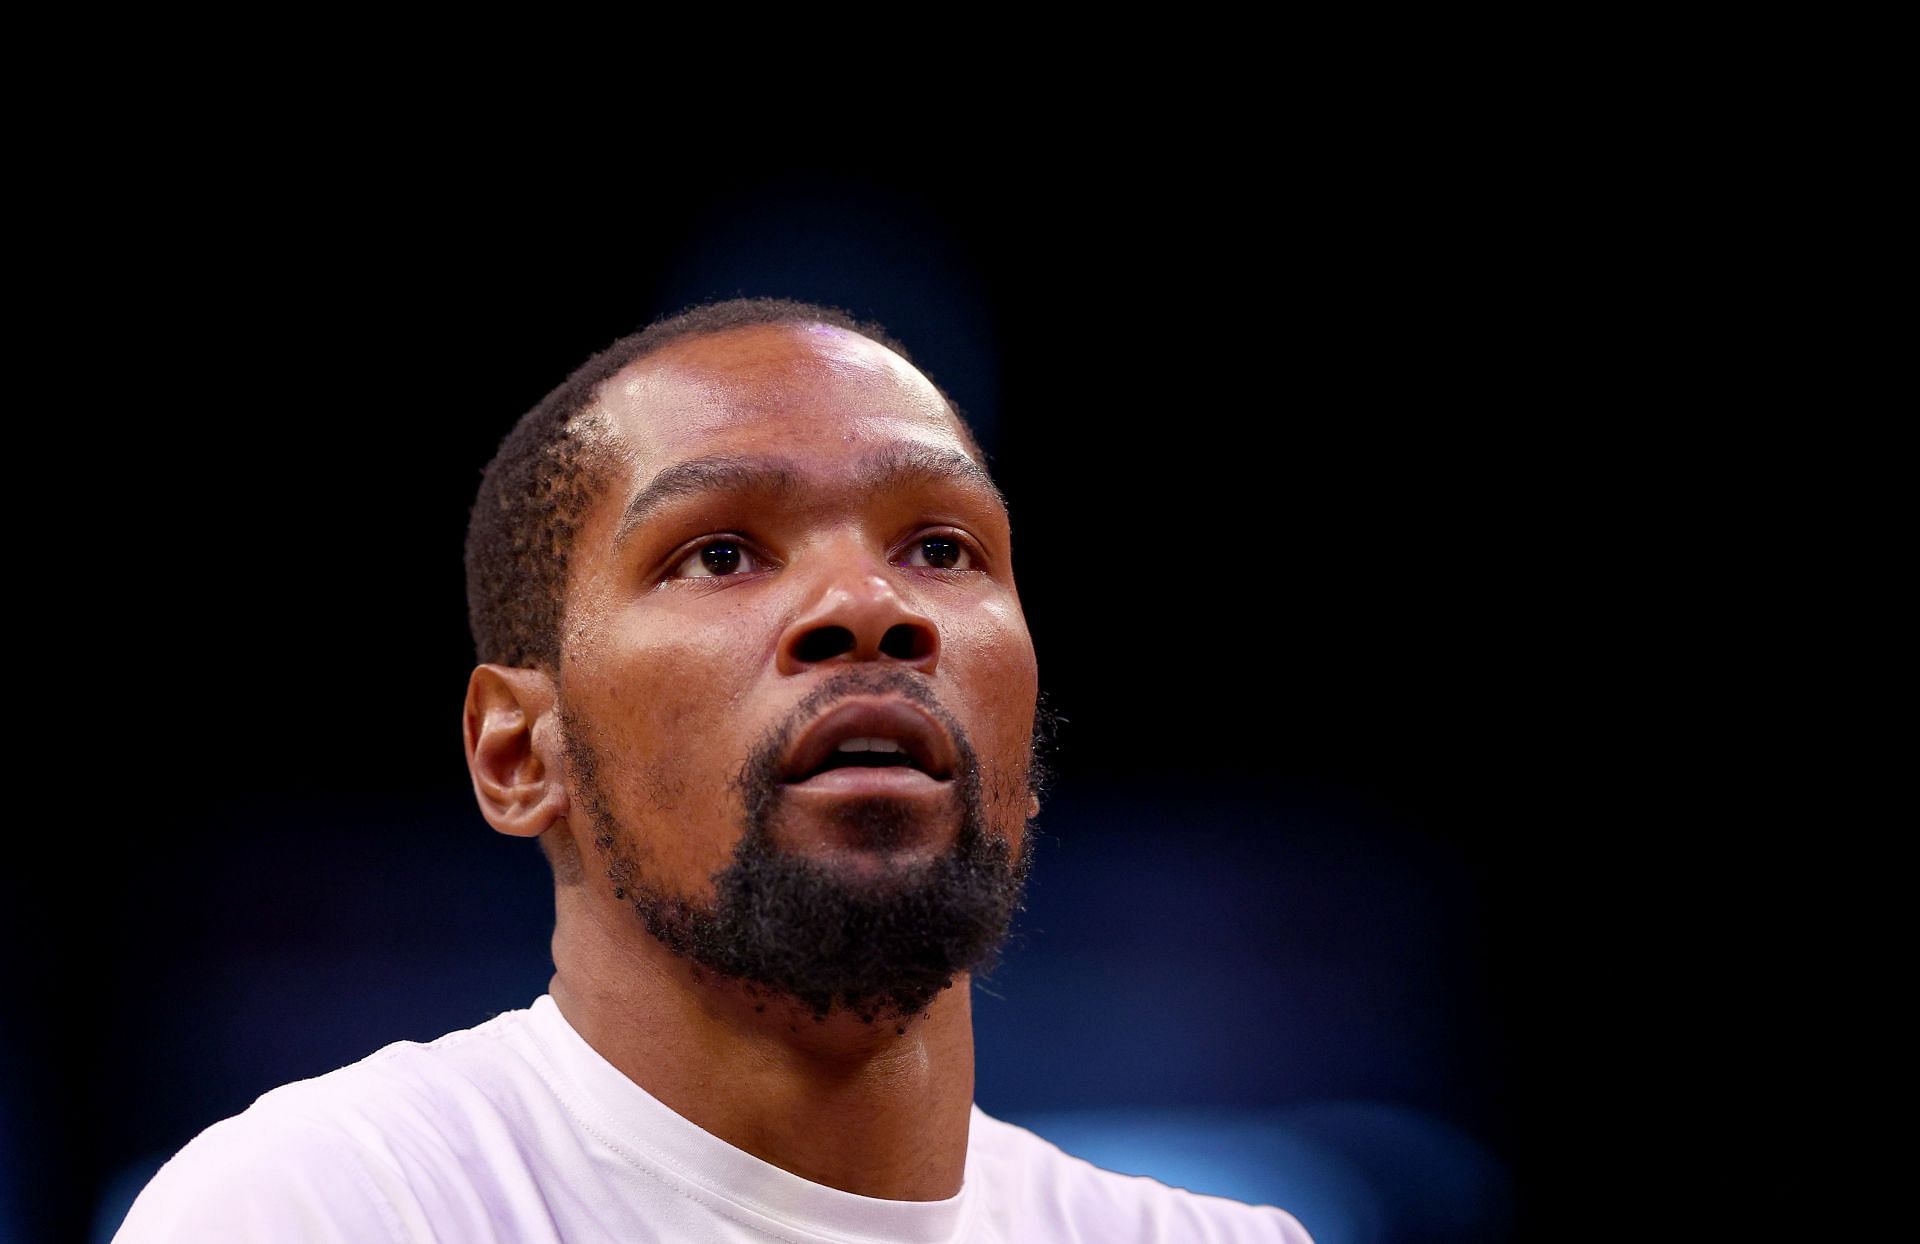 KD has been a constant feature in the NBA news roundup